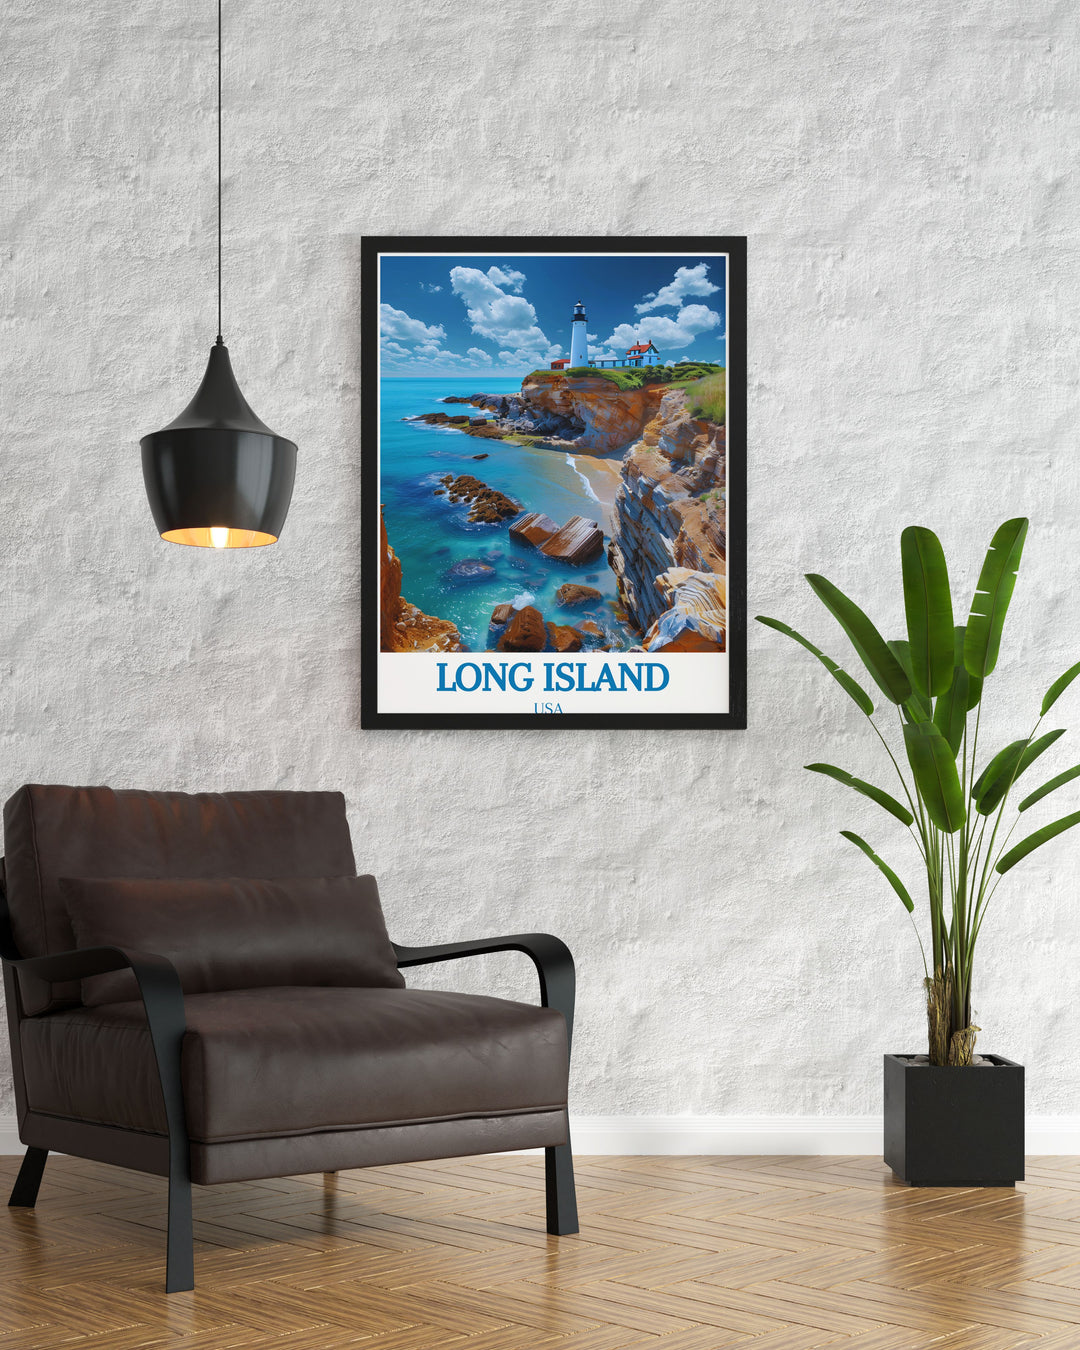 Featuring the expansive beaches and vibrant communities of Long Island, this poster showcases the islands inviting landscapes, perfect for those who cherish coastal living.